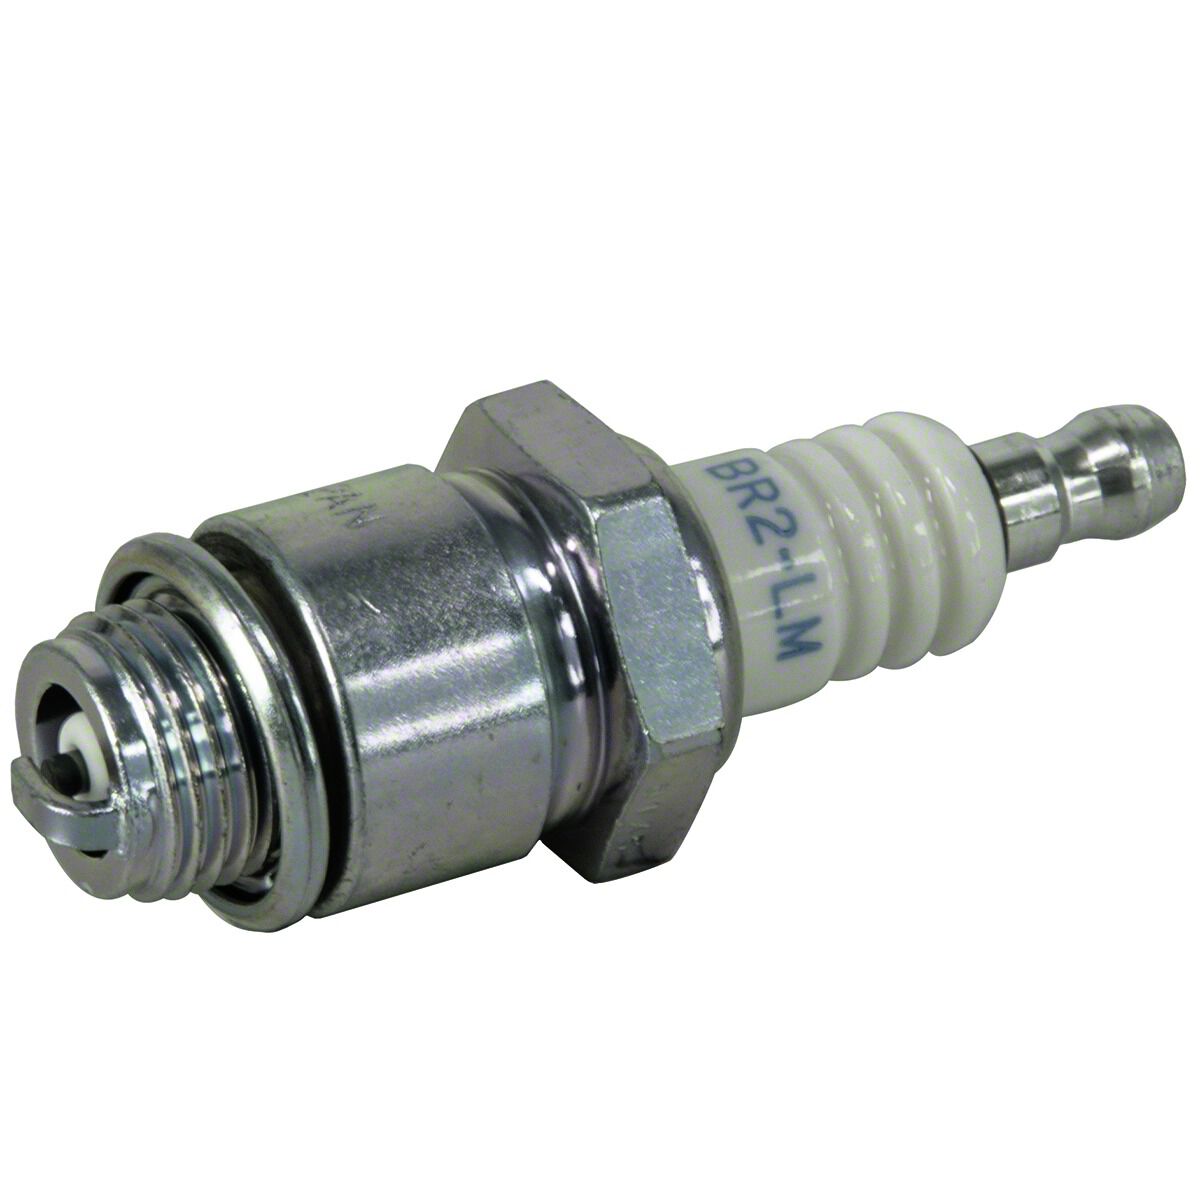 Gutbrod NGK BR2LM                5798 Spark plug OE REPLACEMENT XX686 338182 